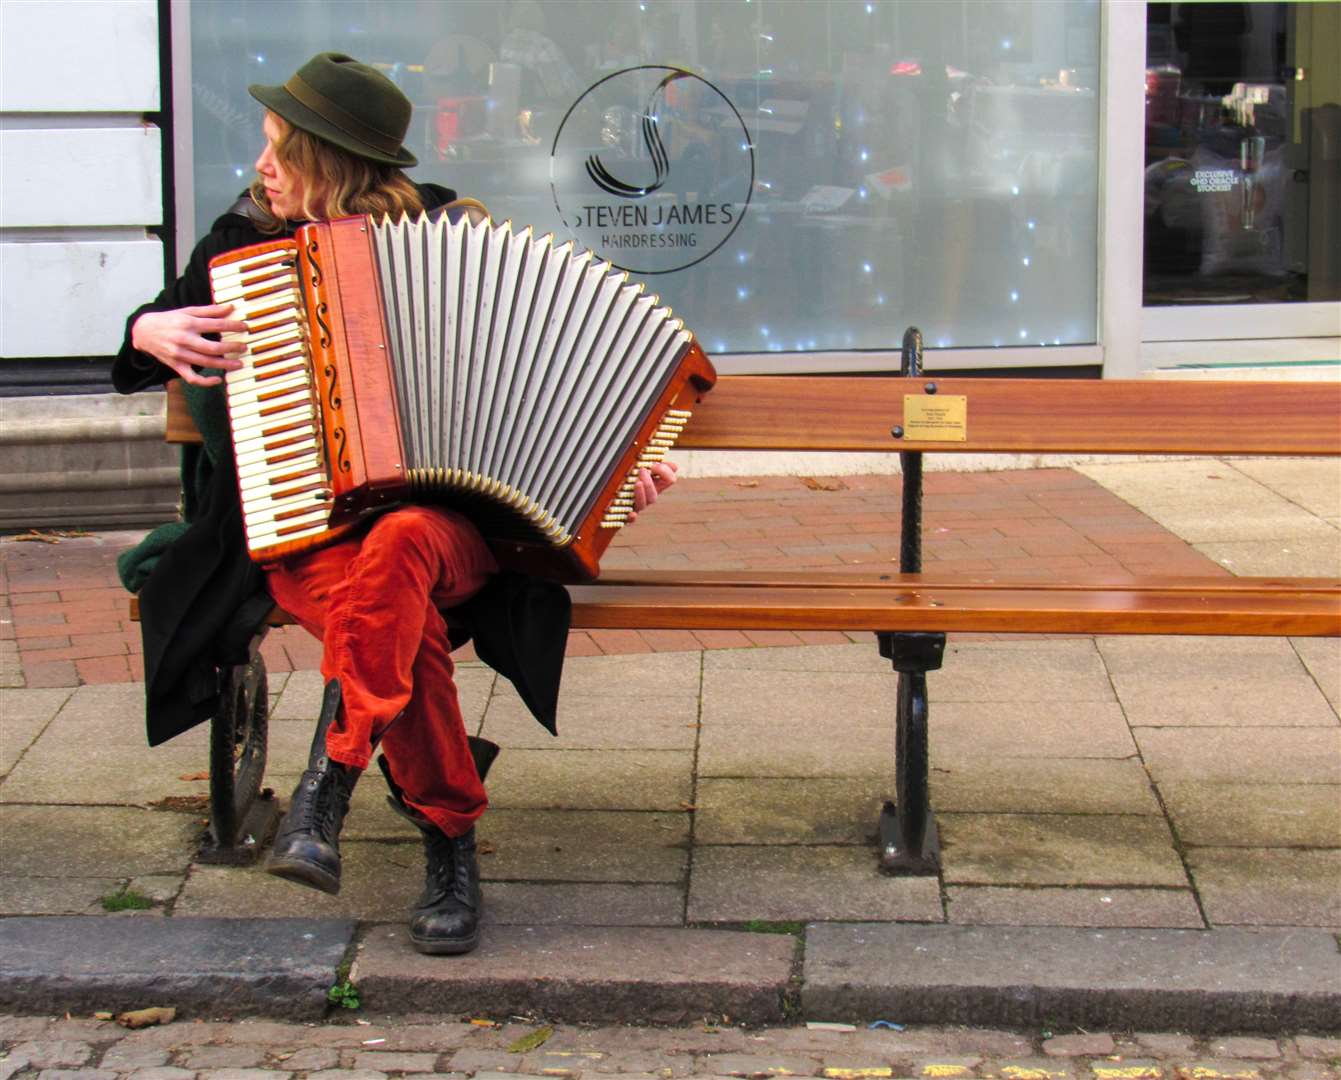 Lyn Powell captured Louisa playing Wildest Rose on her accordion at Faversham Market. She was also selling her CD, Whiskey Moon Face